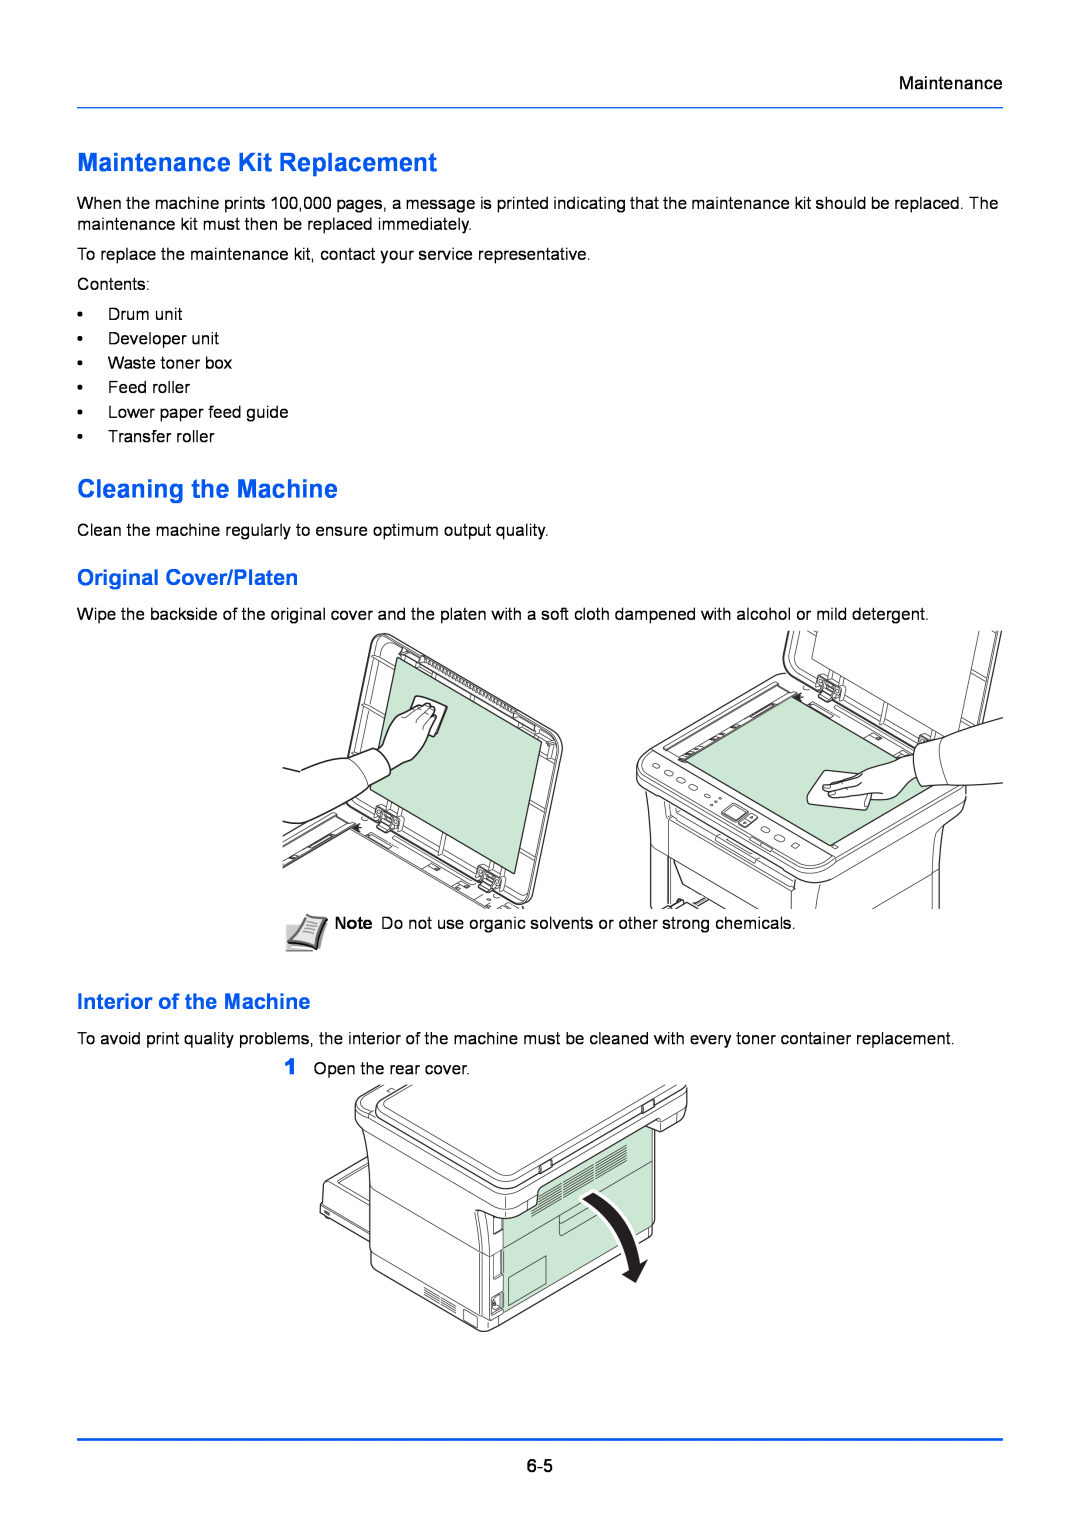 Kyocera FS-1220MFP manual Maintenance Kit Replacement, Cleaning the Machine, Original Cover/Platen, Interior of the Machine 